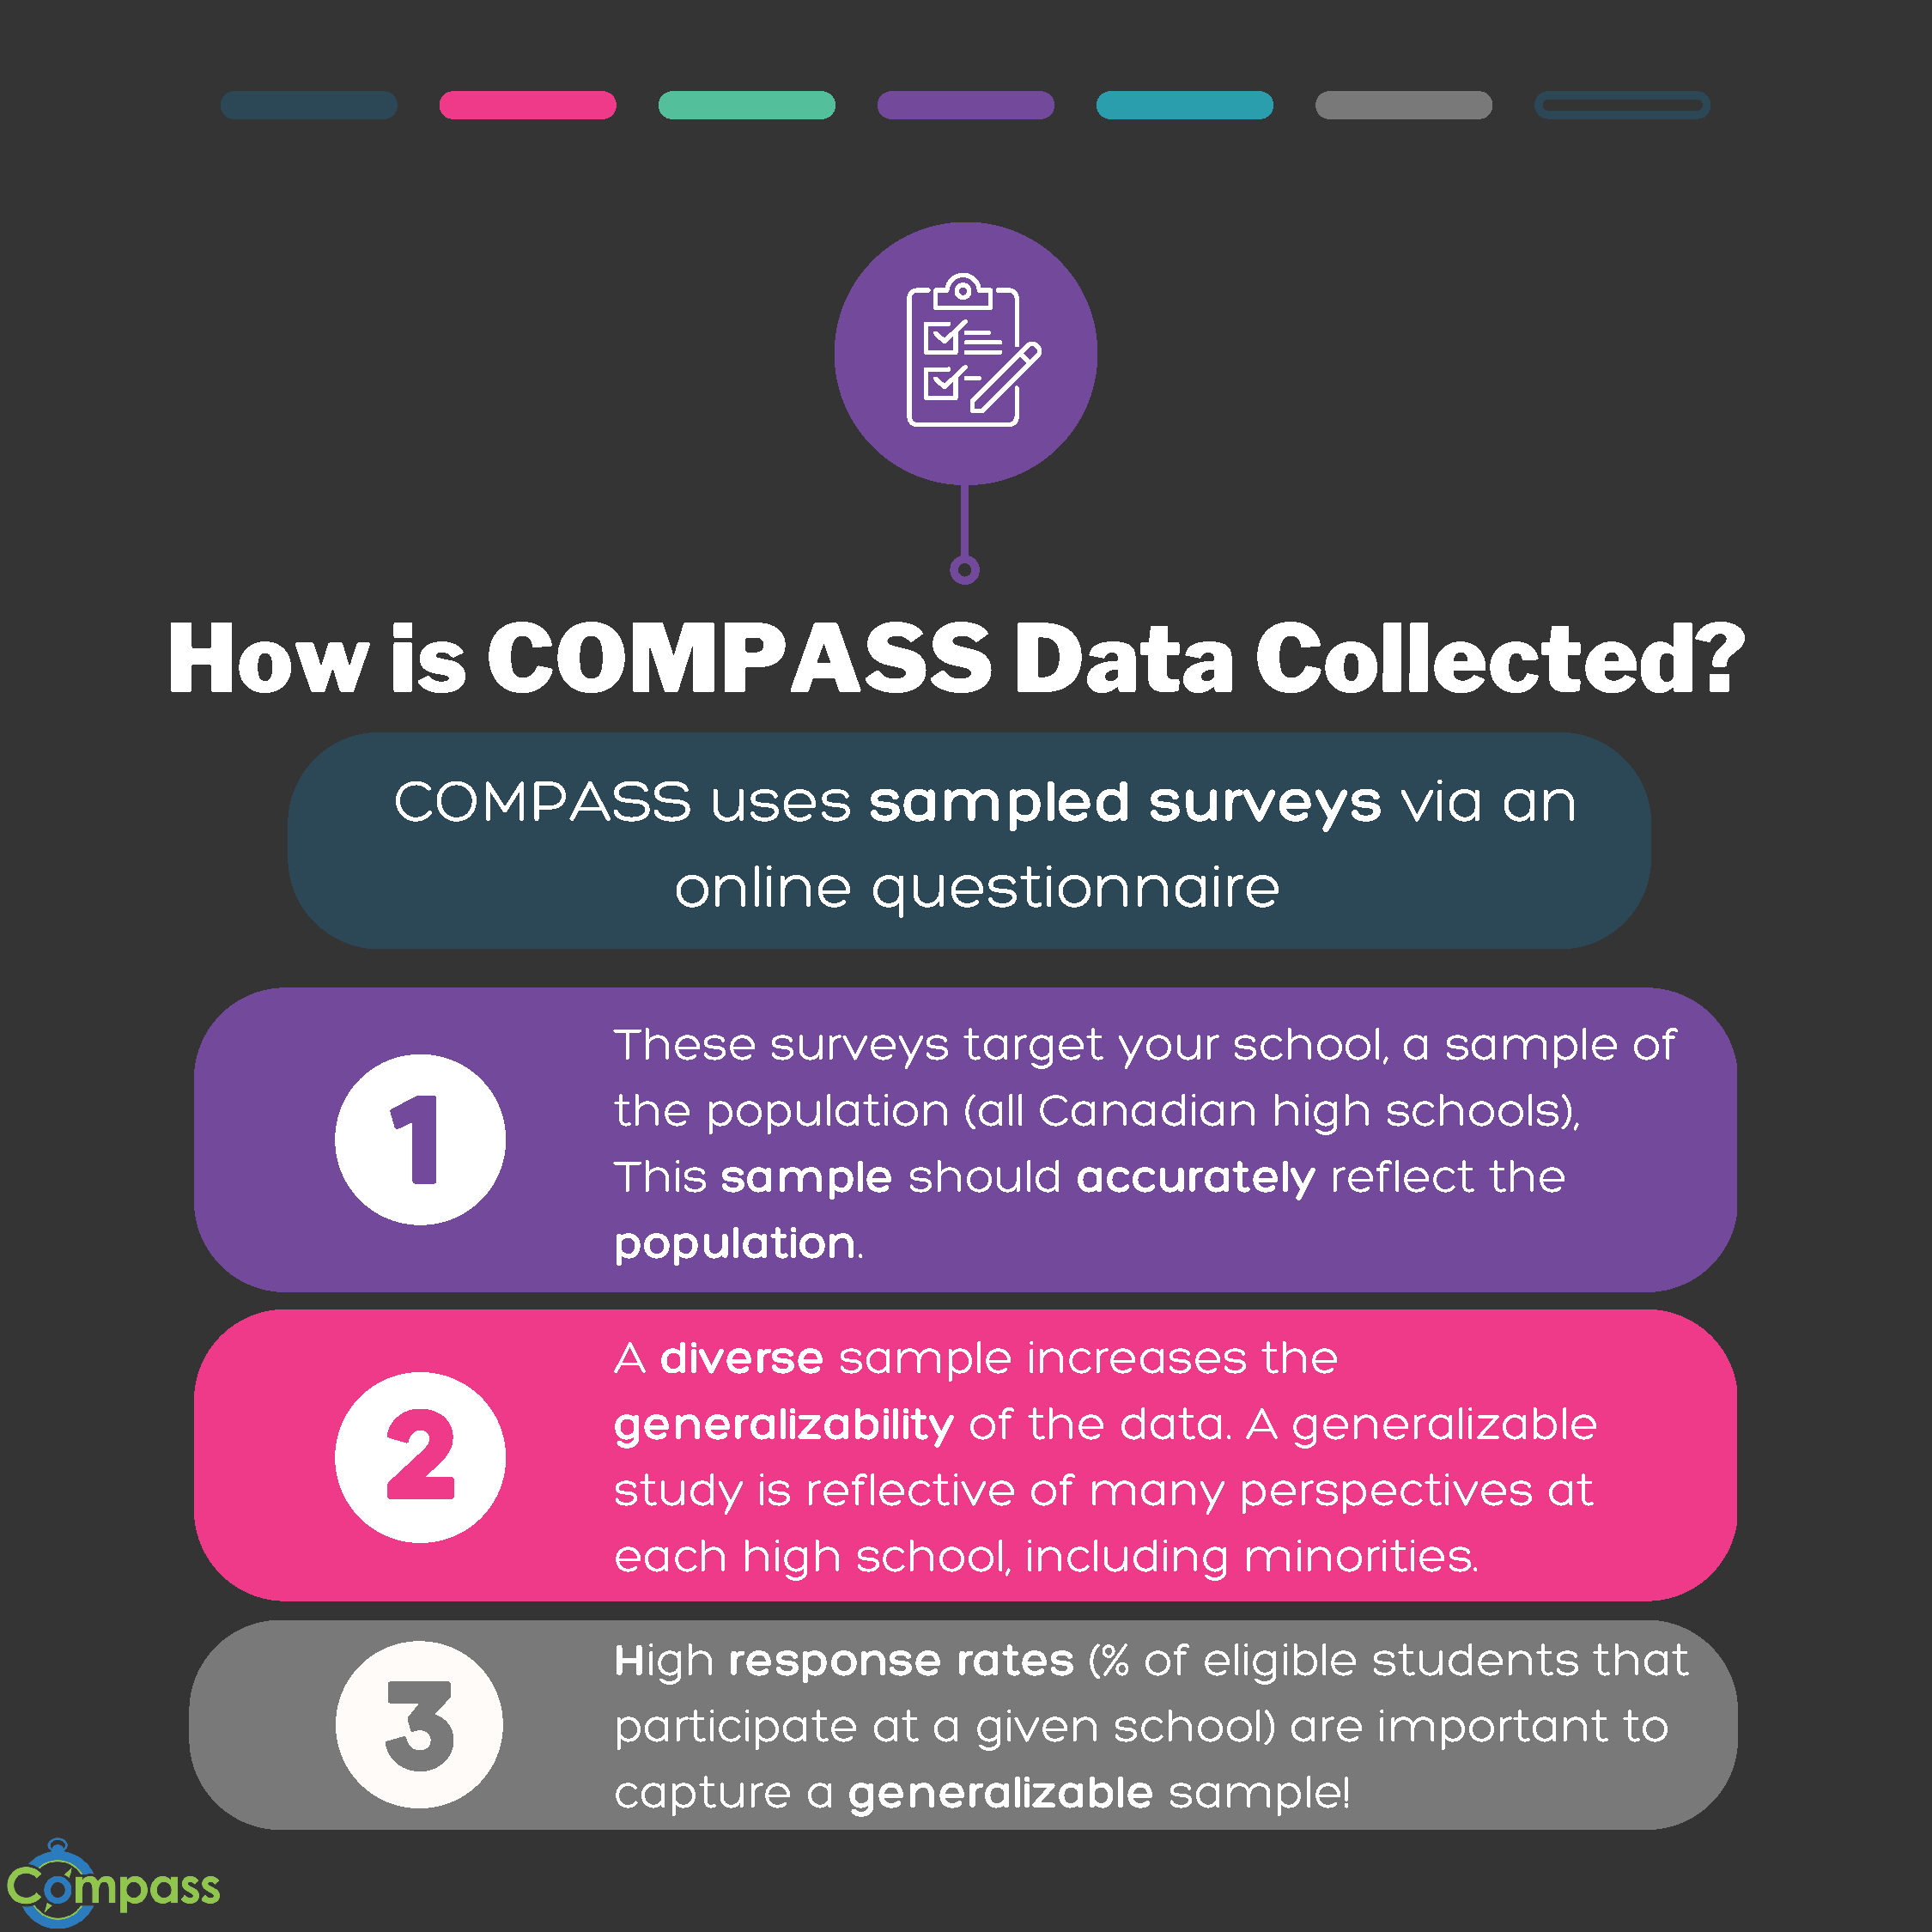 Figure 6- how is COMPASS data collected